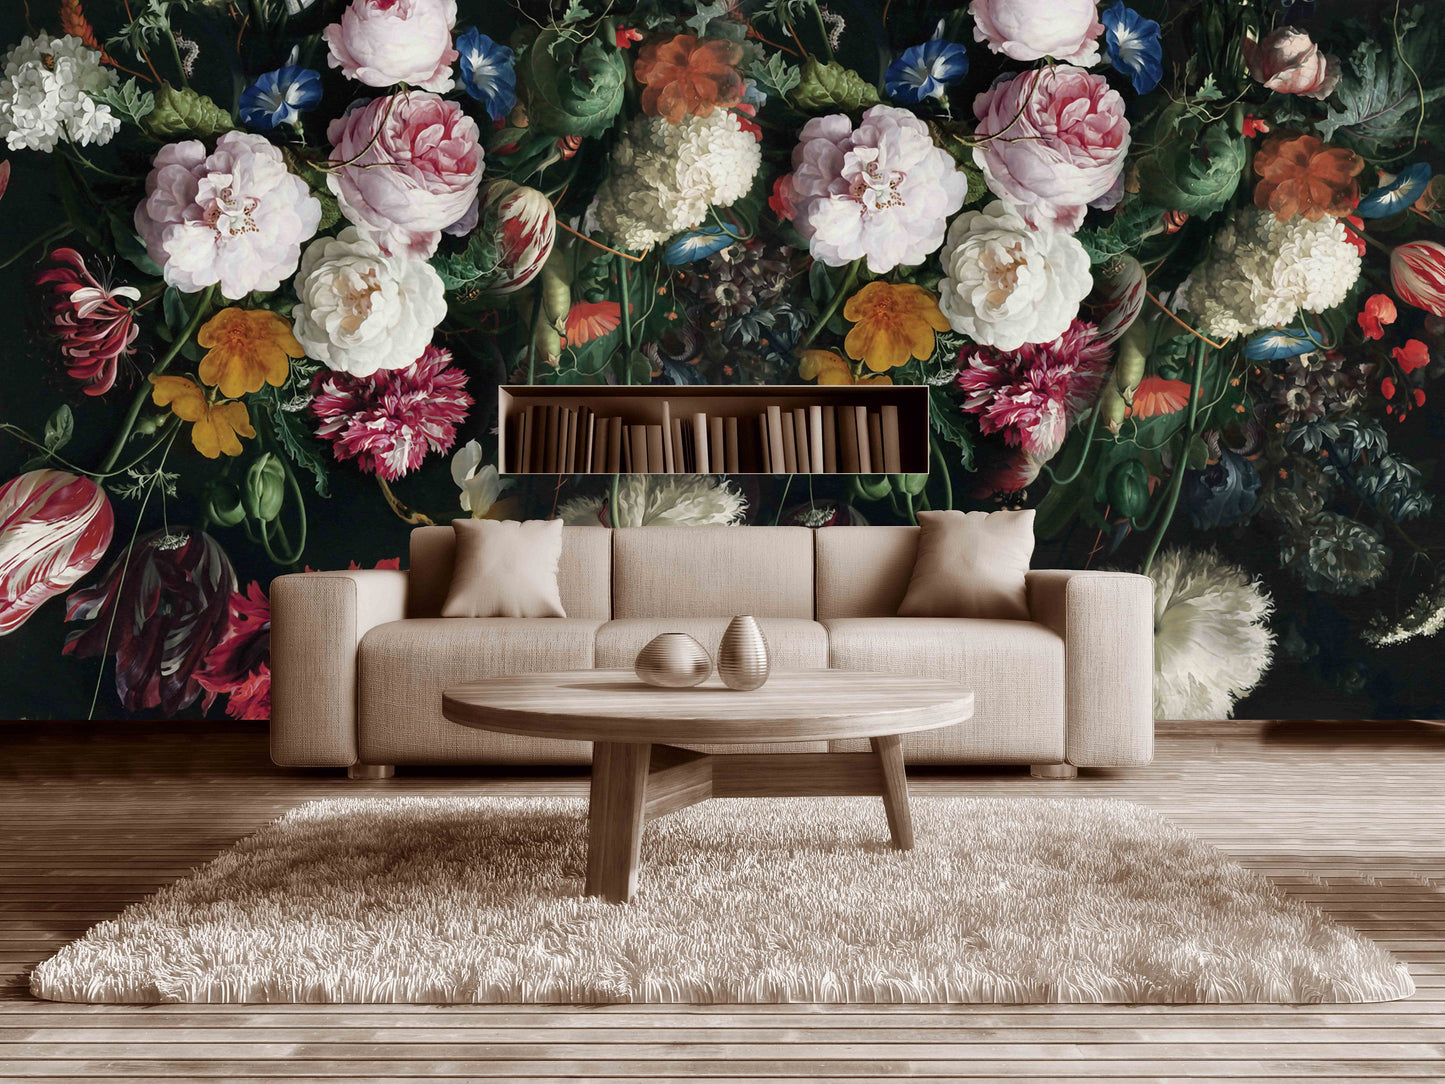 Dark Floral Peel and stick flowers Wallpaper Botanical Textured adhesive Wall Mural Decor for Bedroom Living Room